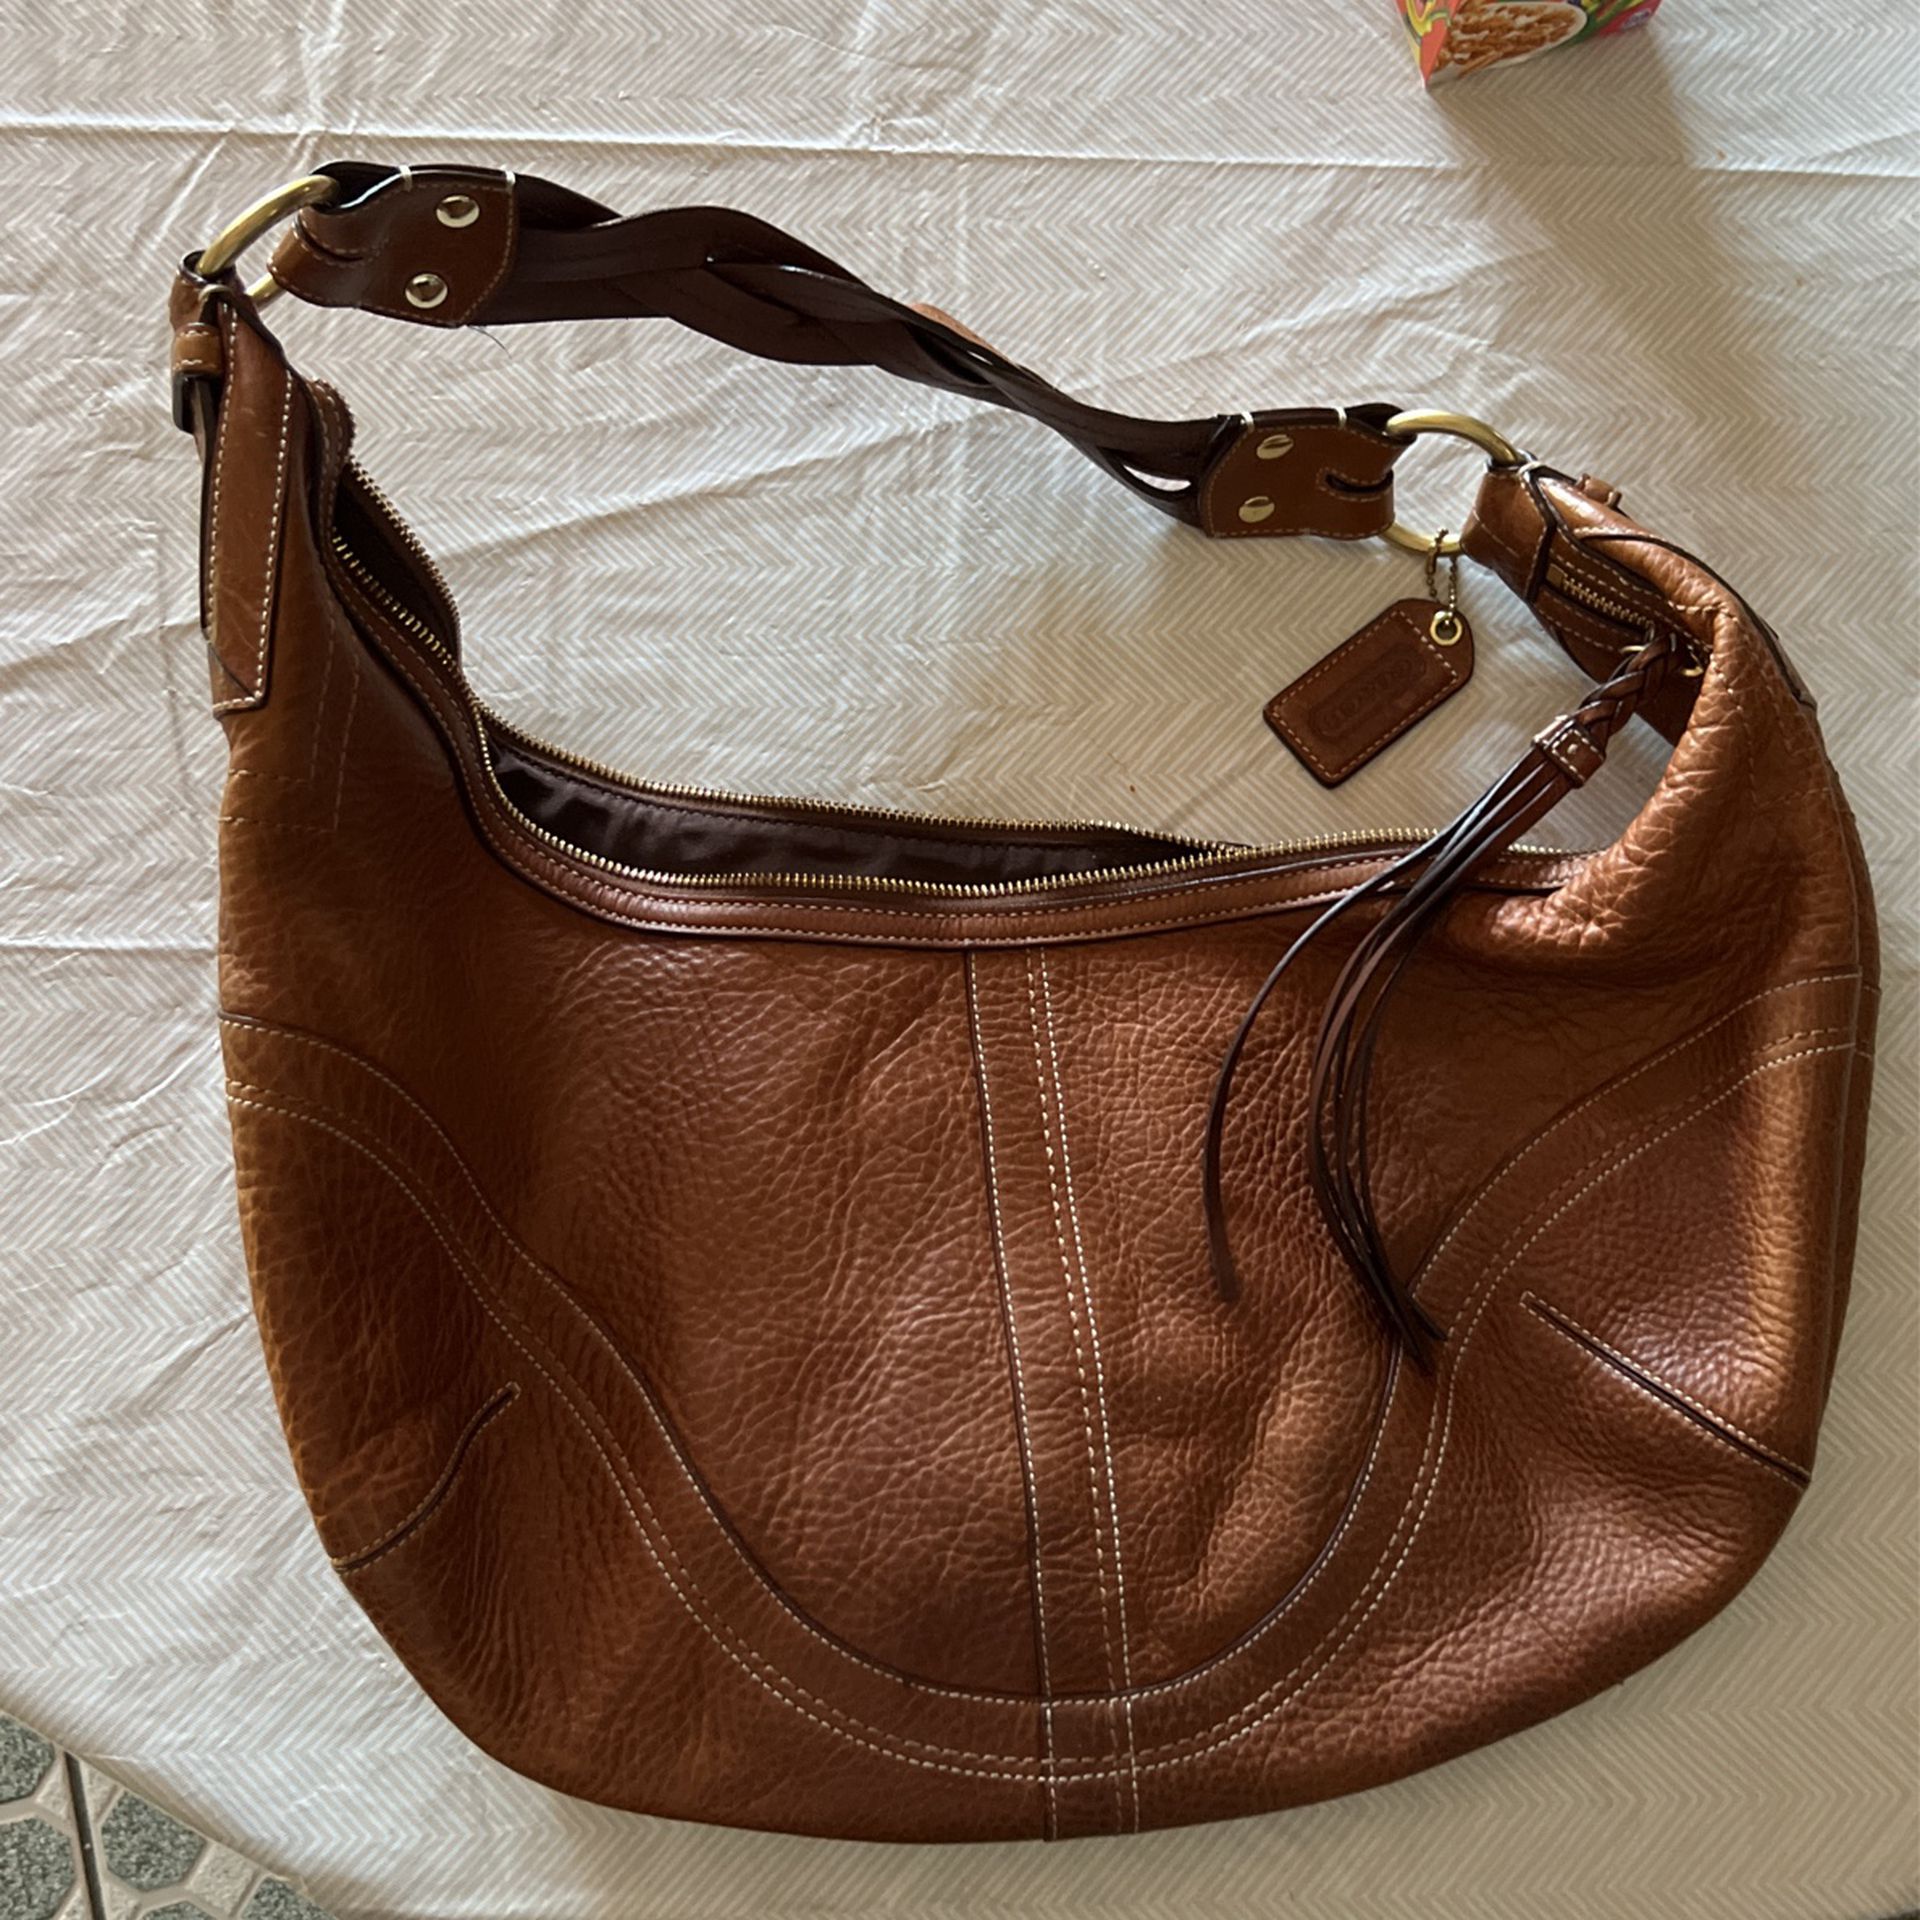 Coach Hobo Brown Leather Purse